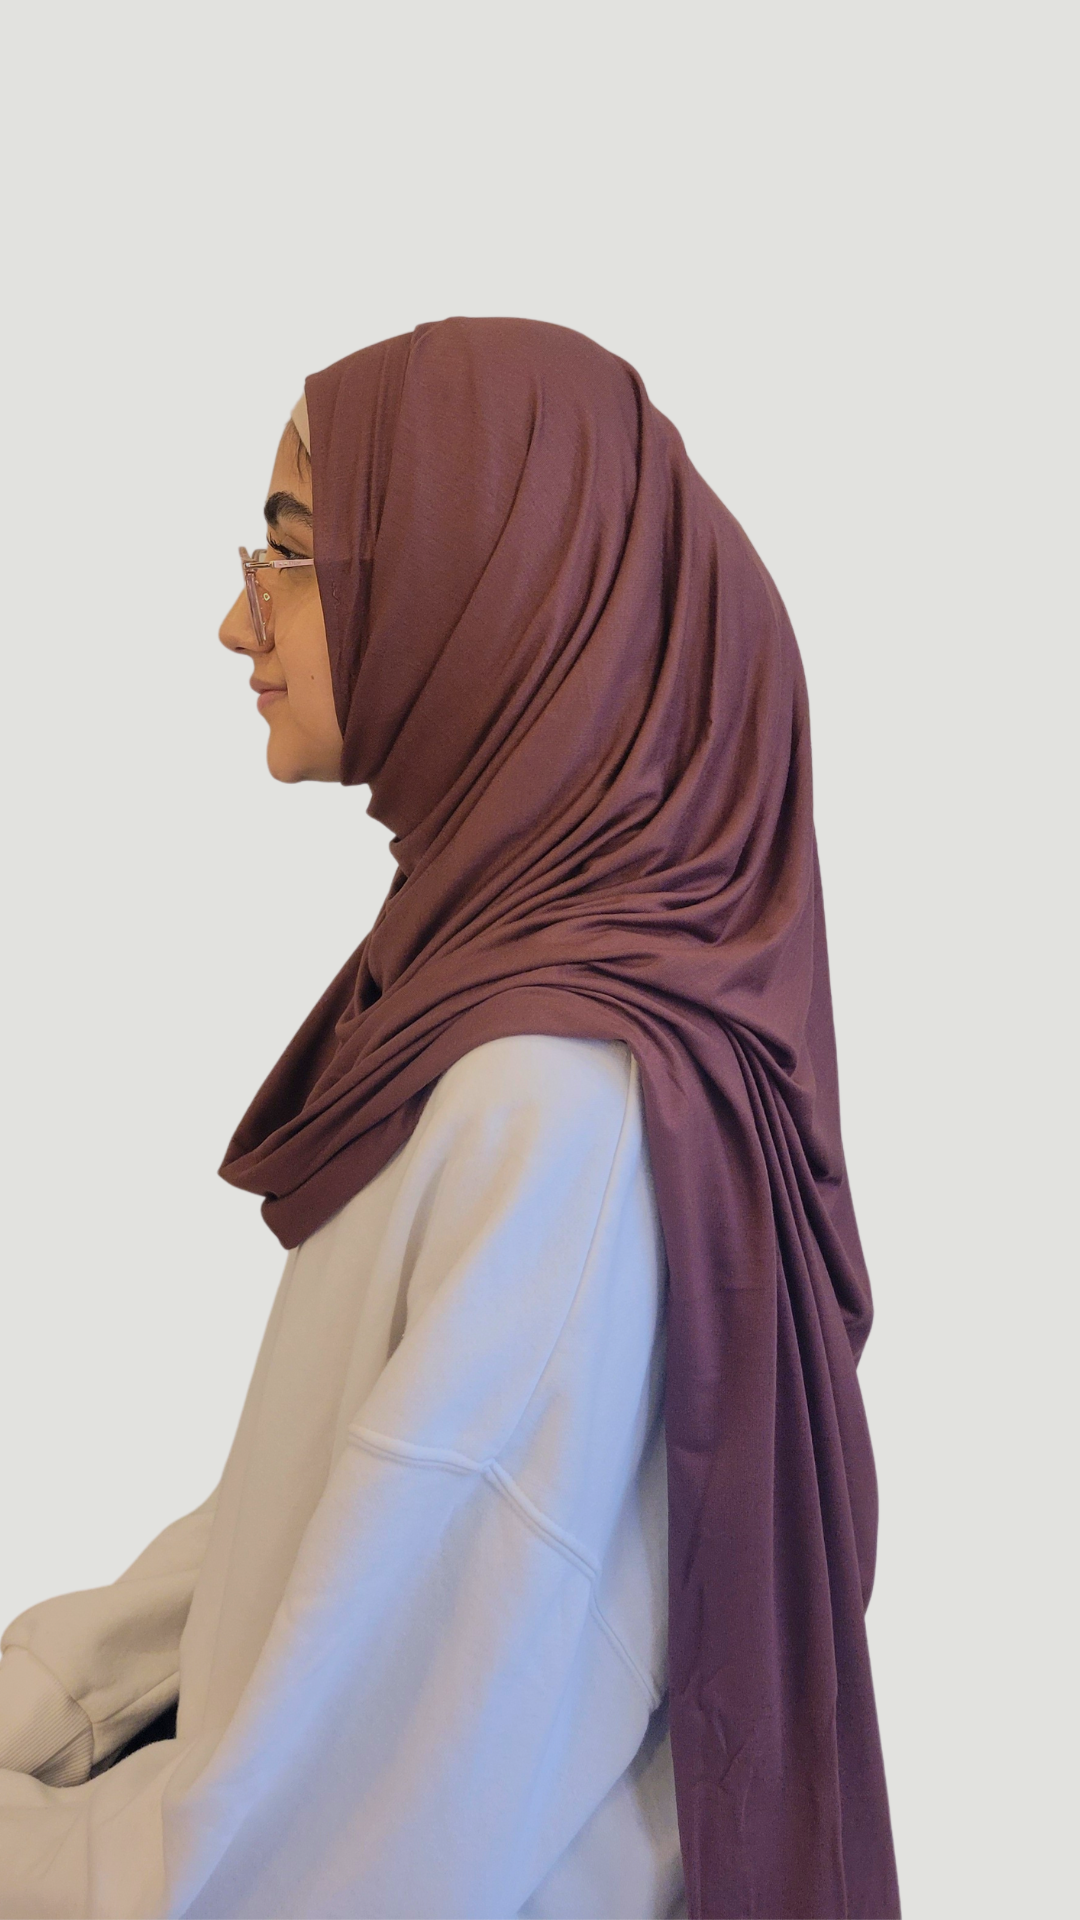 An instant jersey hijab designed for easy styling, without the need for pins. This pinless hijab is made from comfortable jersey fabric, offering a soft and stretchy texture.